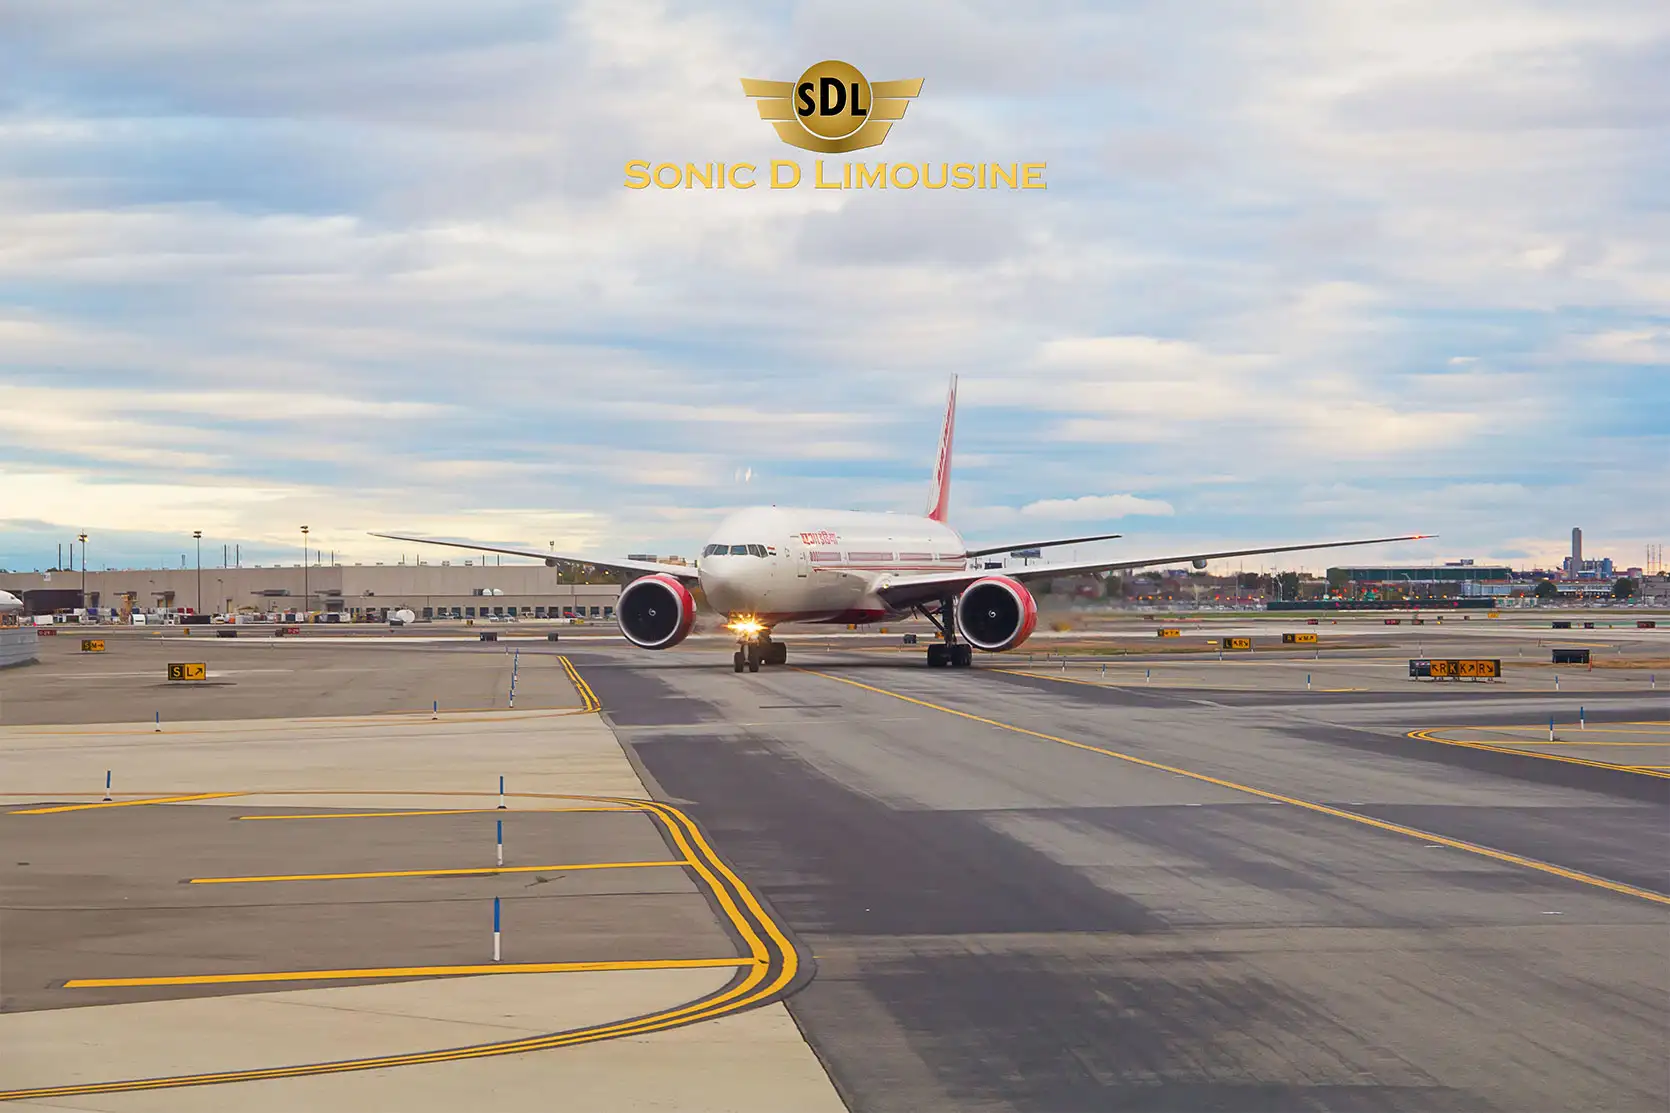 Sonic D Limousine A red and white airplane on a runway.